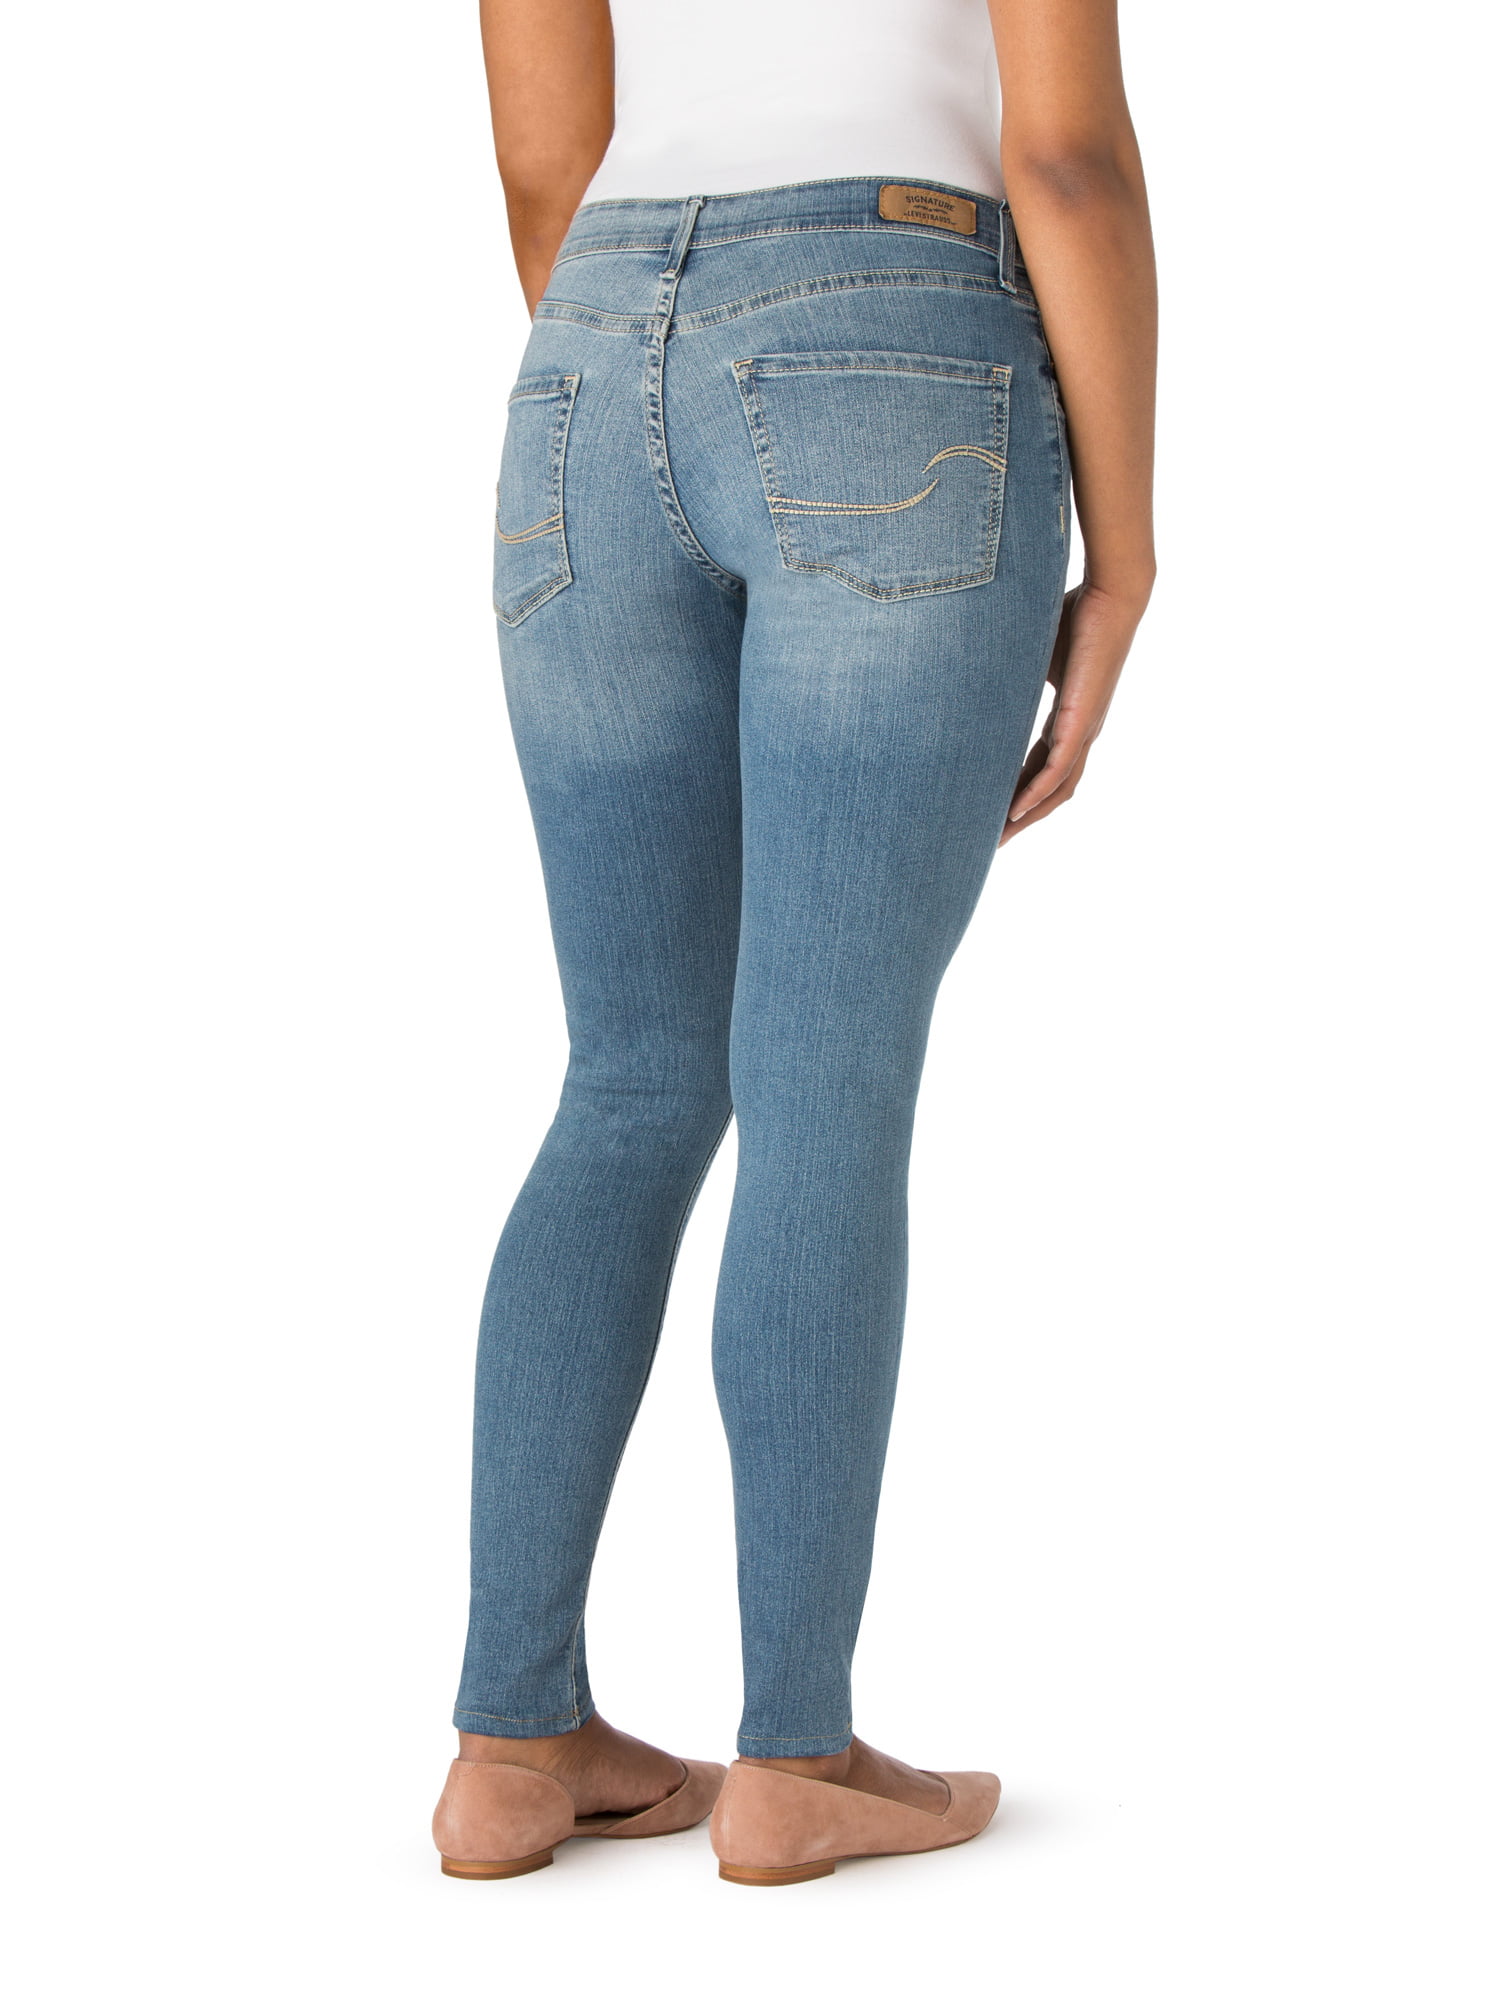 Signature by Levi Strauss & Co. Women's Modern Skinny Jeans 